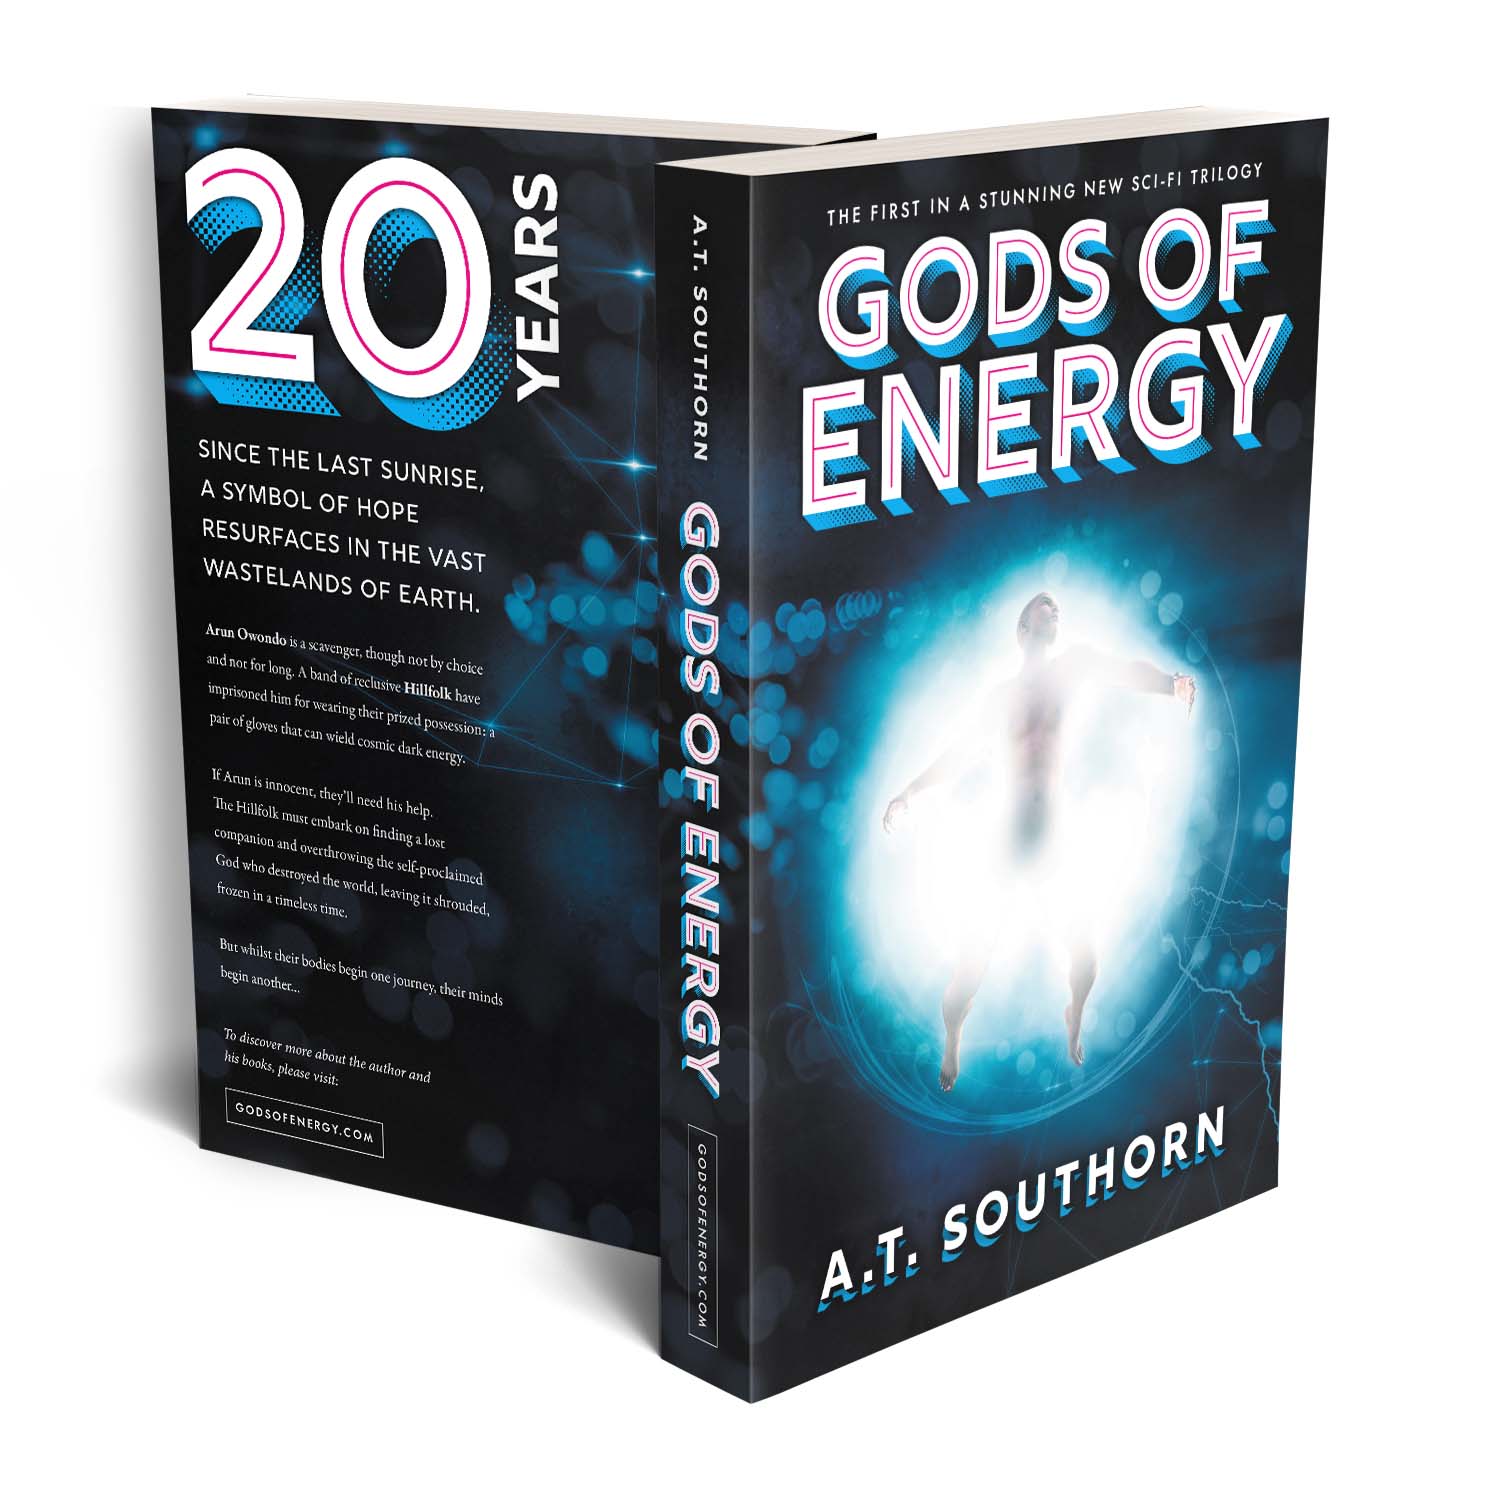 'Gods of Energy' is the first book in an electrifying new scifi trilogy by A.T Southorn. The book cover and interior formatting were designed by Mark Thomas of coverness.com. To find out more about my book design services, please visit www.coverness.com